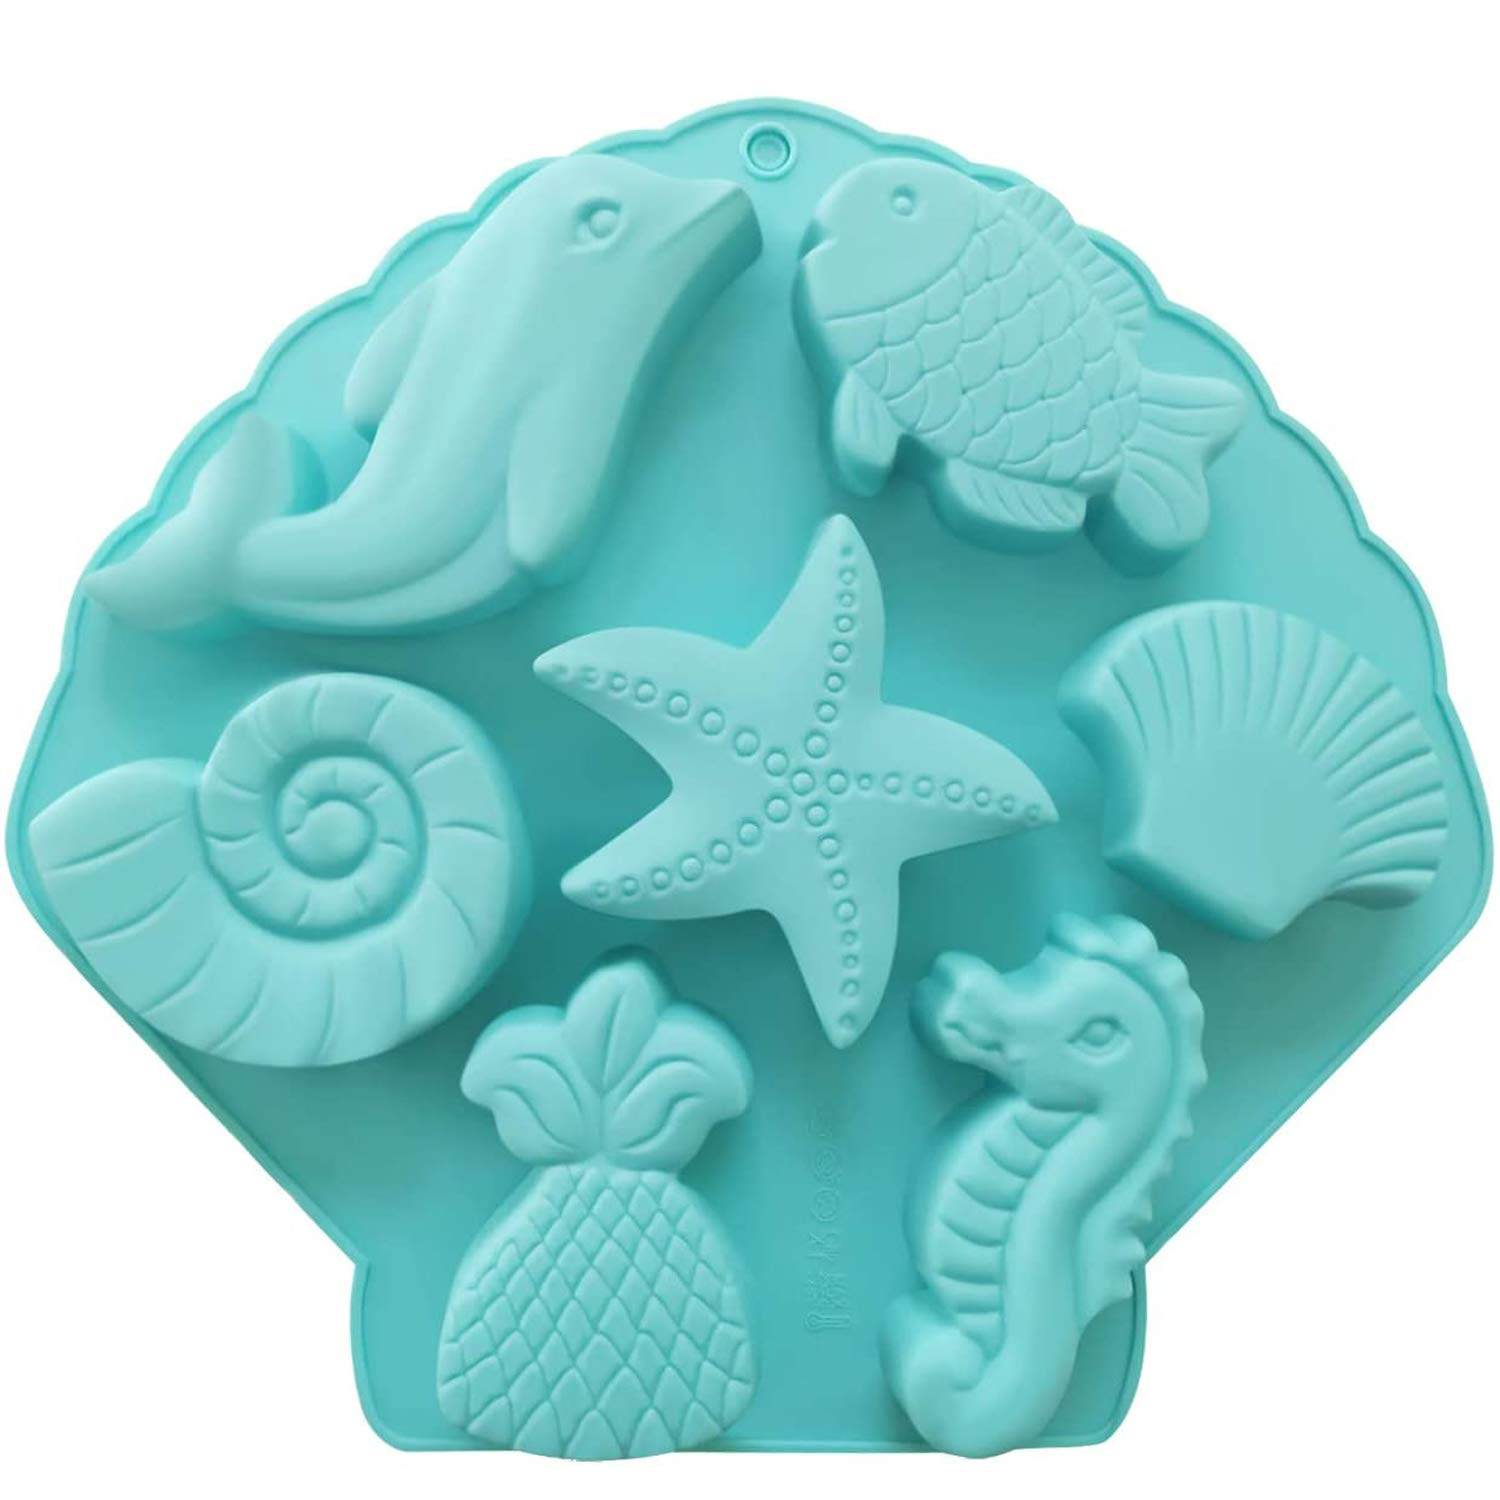 ESEDAGE Fish Mold Ocean Candle Mold Turtle Candle Mold Whale Mold Starfish Mold Resin Casting Mold Soap Making Molds Silicone Mold for Candle Home Decorate